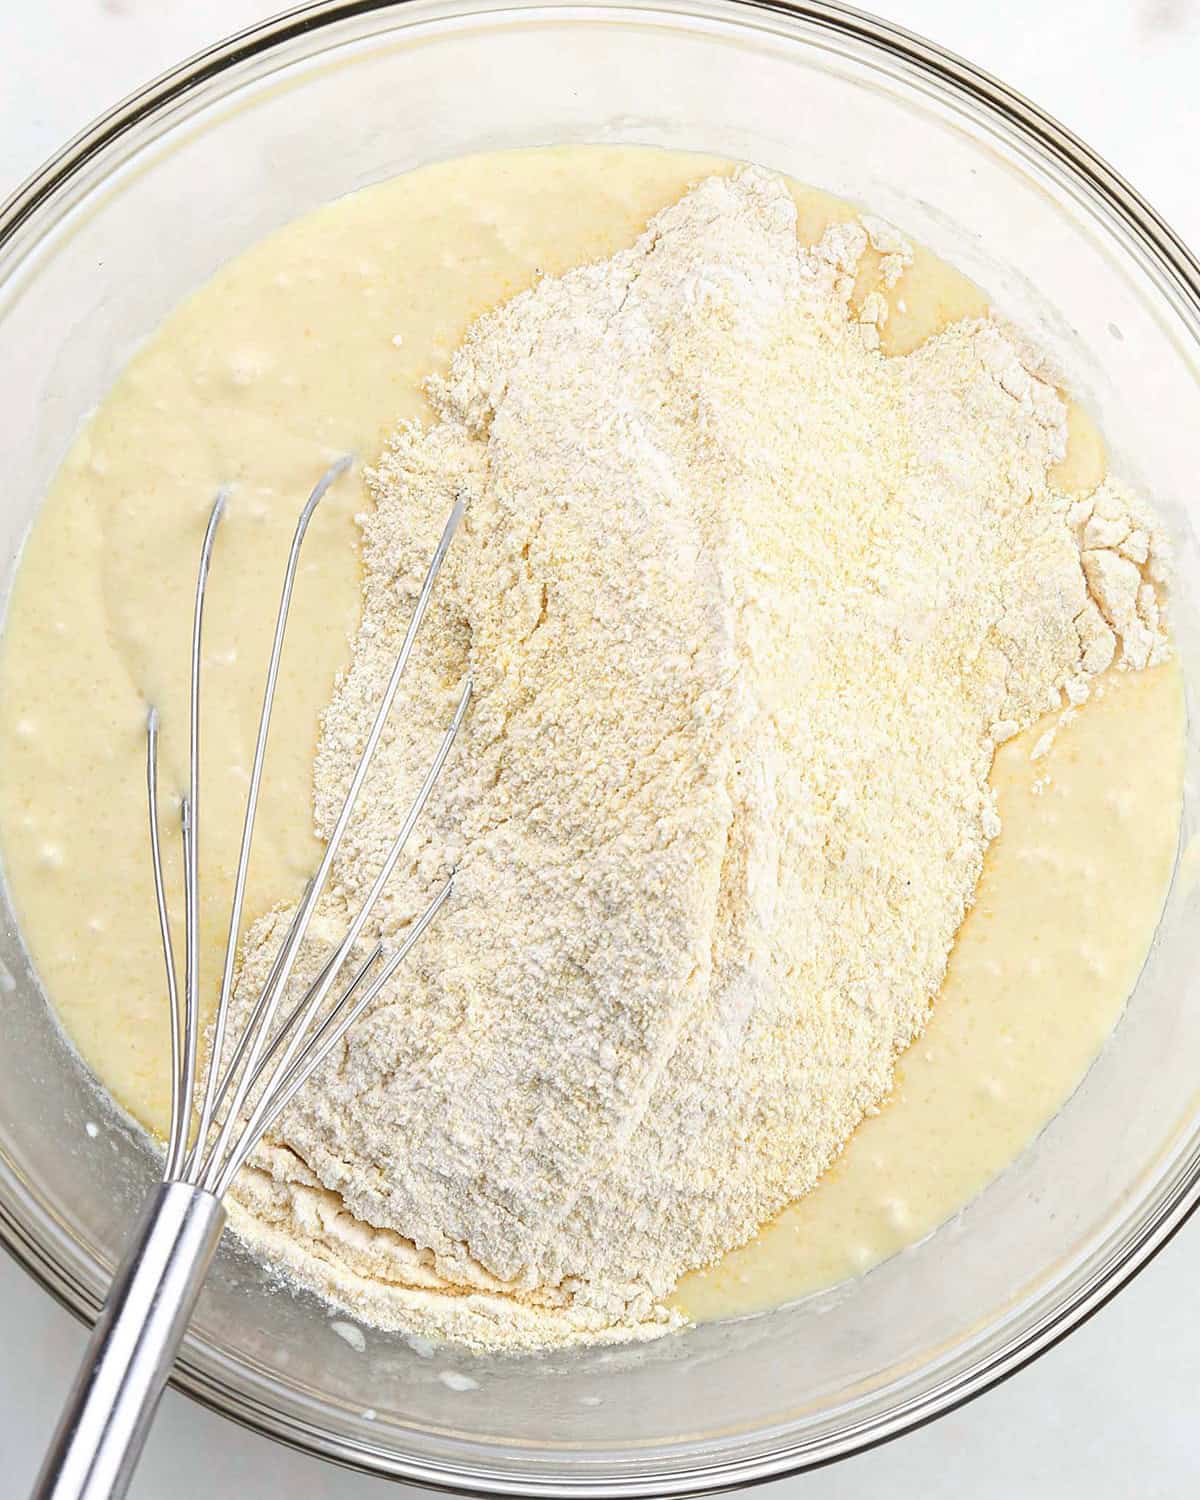 How to Make Skillet Cornbread - dry ingredients added to wet ingredients before whisking